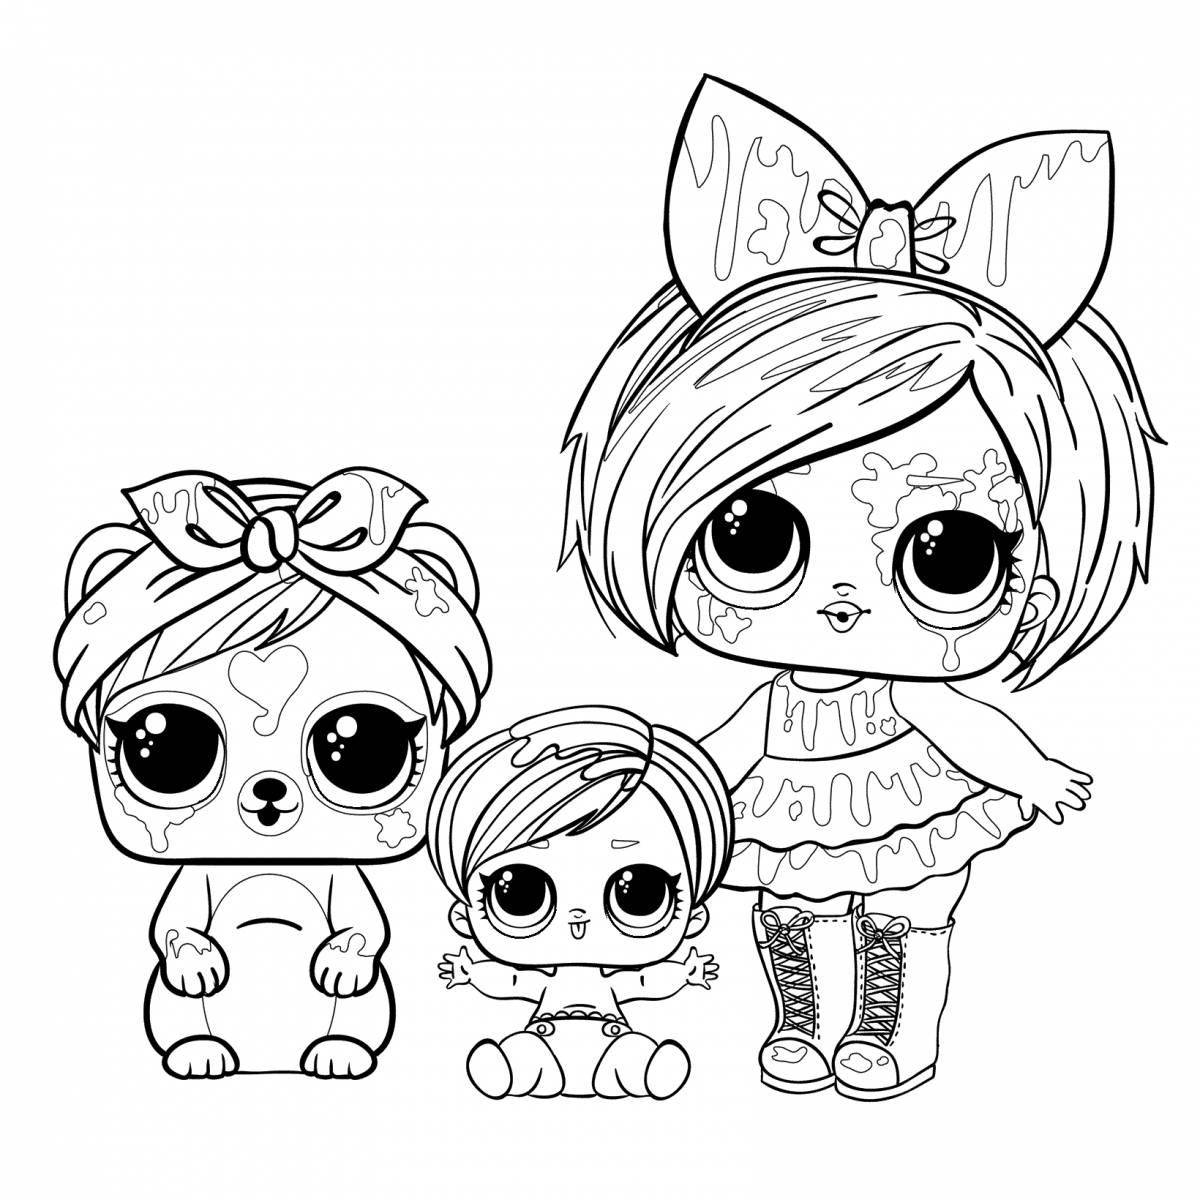 Adorable lol family coloring doll